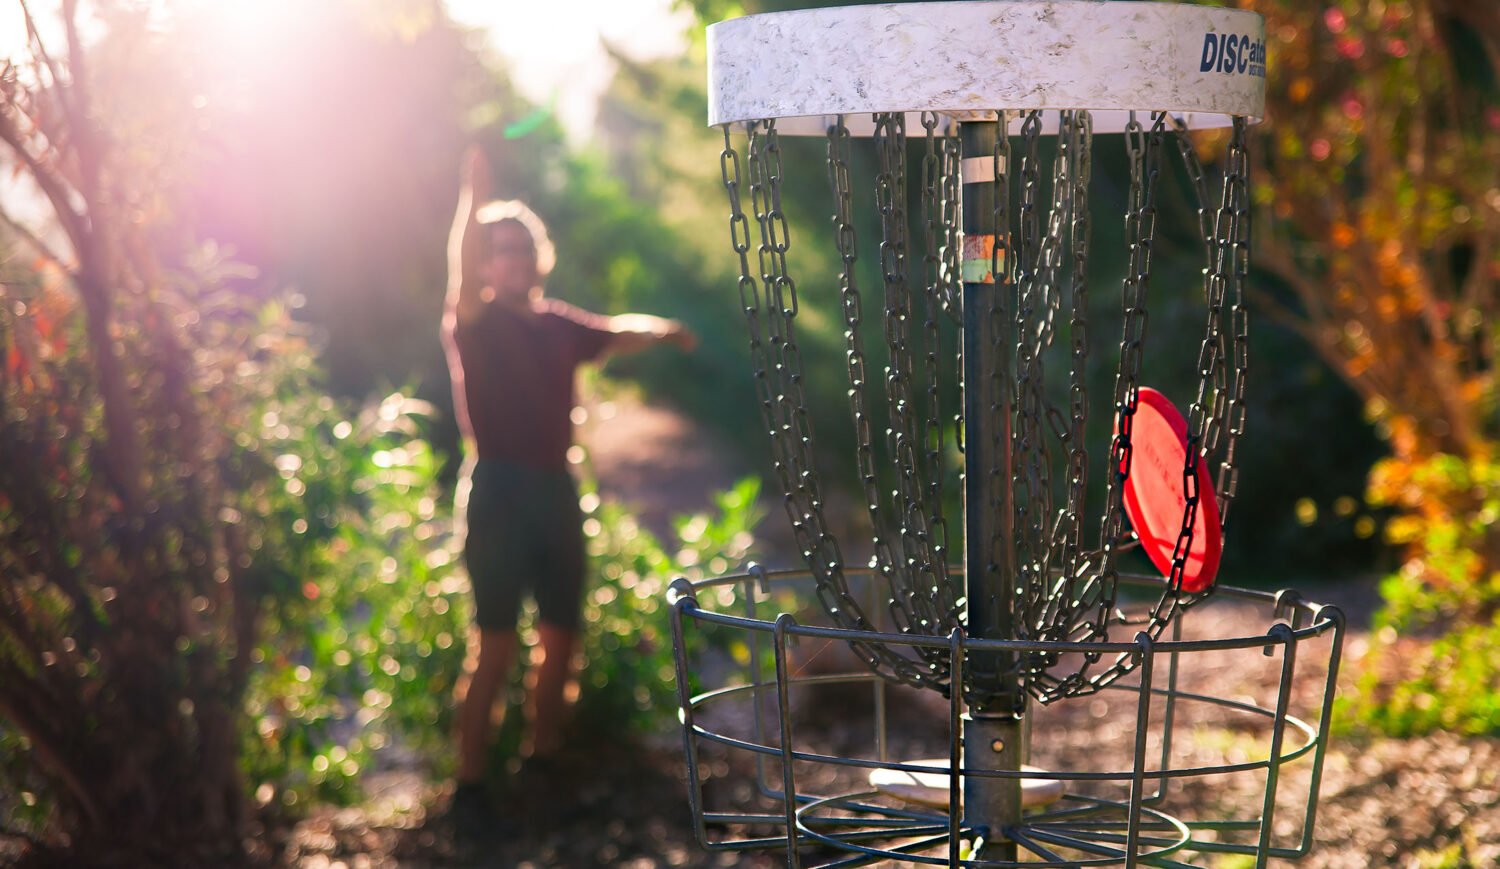 The sport Disc Golf has arrived in Bremen and enjoys great popularity